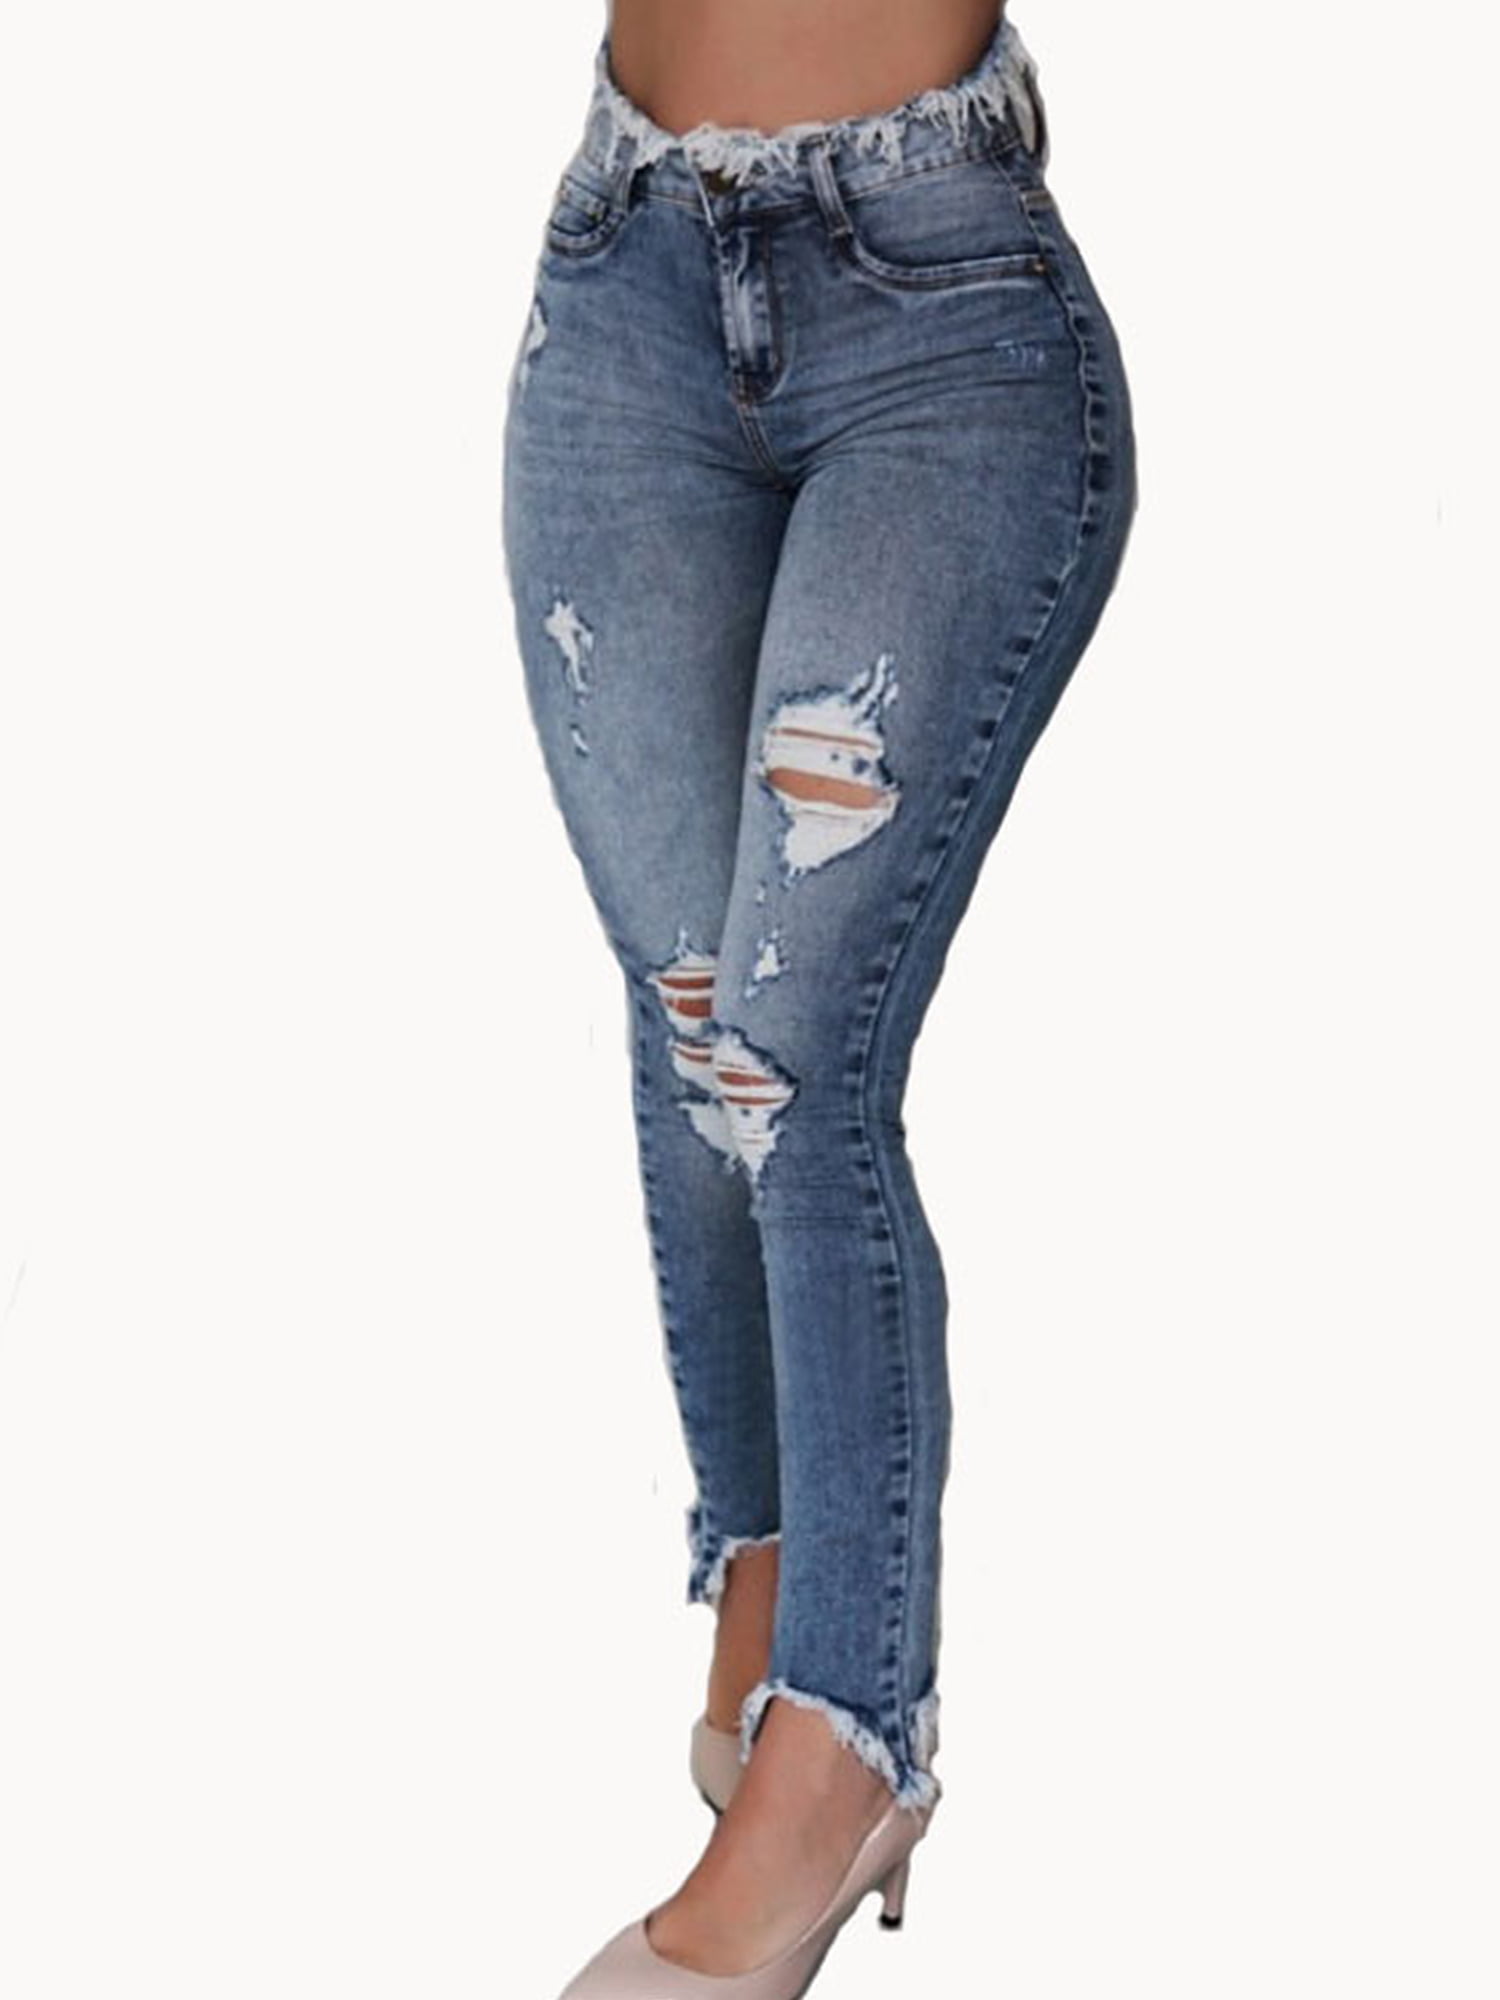 Womens Ripped Distressed Boyfriend Jeans Stretch Skinny Butt Lift Comfy Denim Pants Morecome